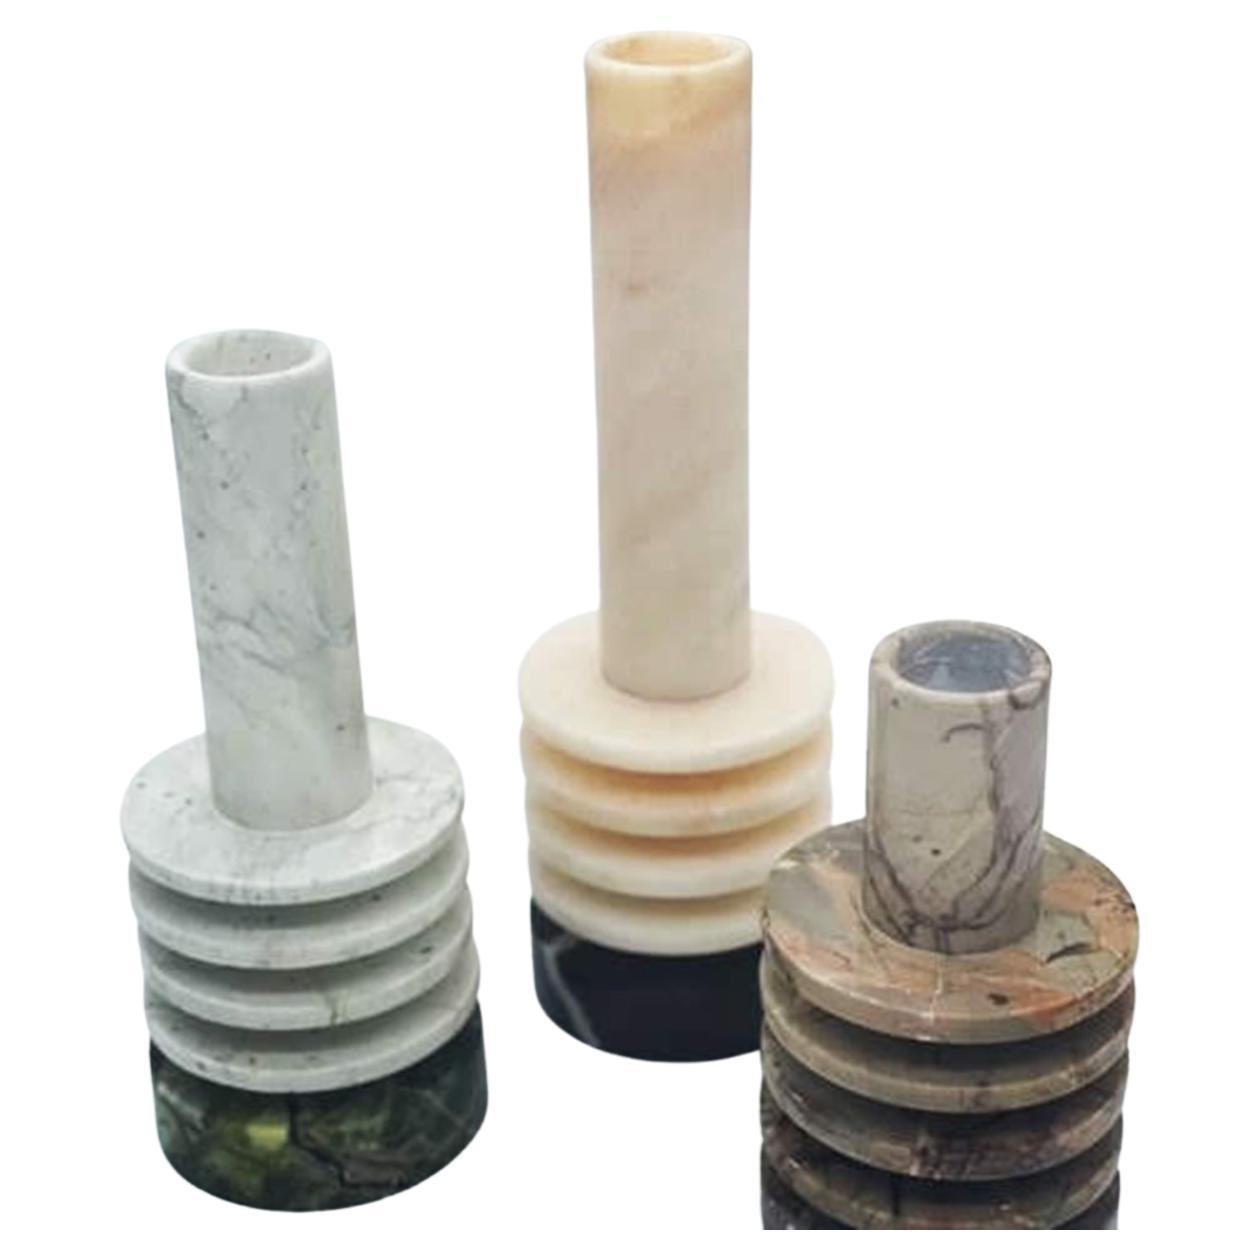 2K1M Flames "Conicita" Marble Candle Holders, Set of Three Made in Carrara Italy For Sale